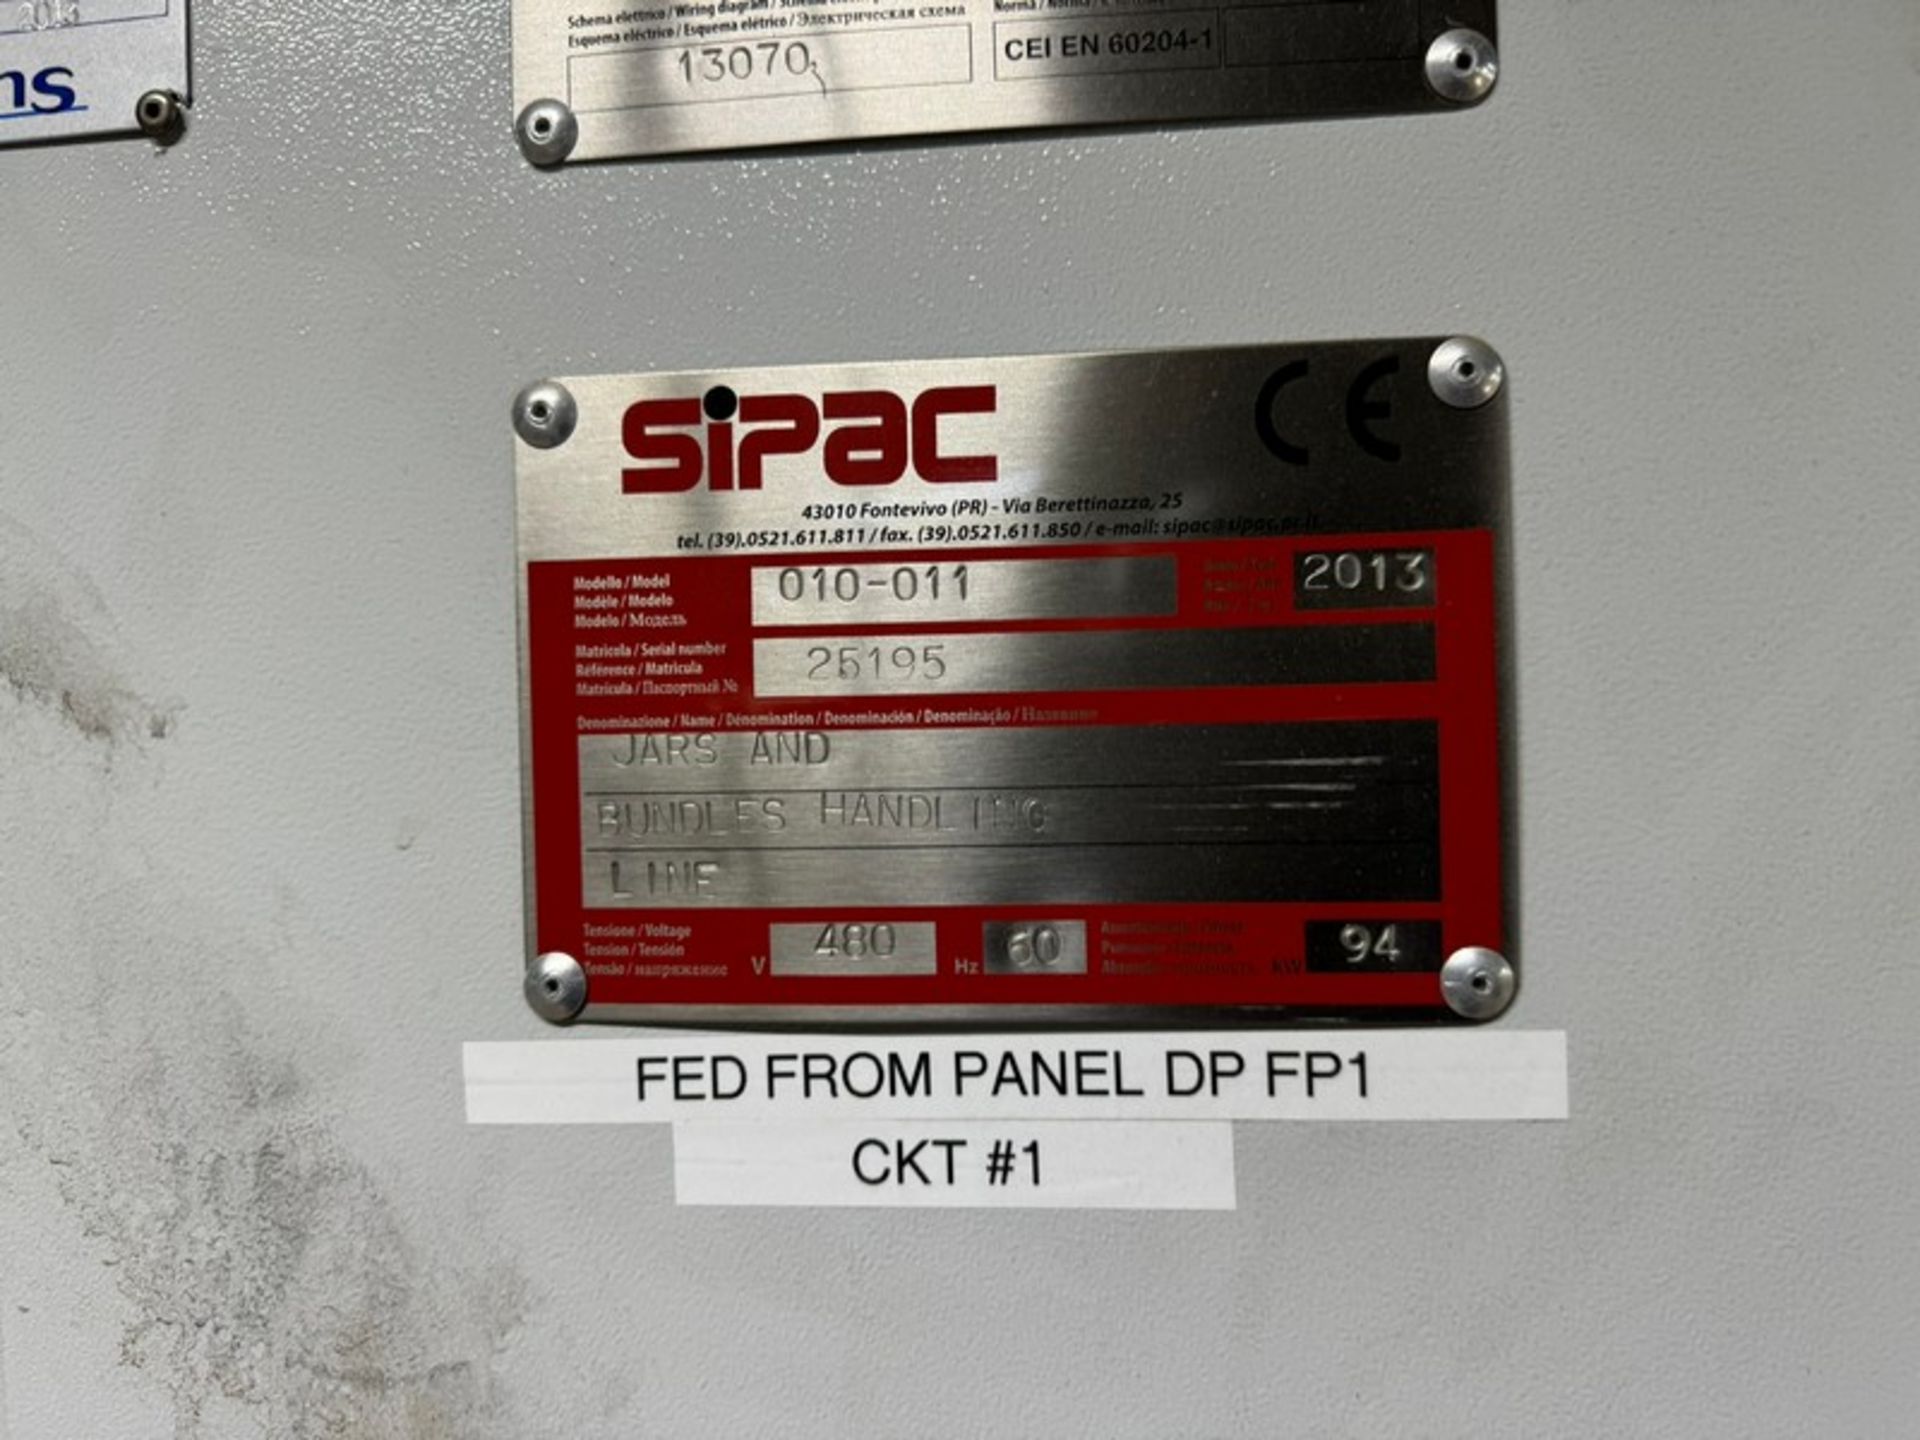 SIPAC 4-Door Control Panel, Allen-Bradley VFDs & Other Components (LOCATED IN FREEHOLD, N.J.) - Image 6 of 7